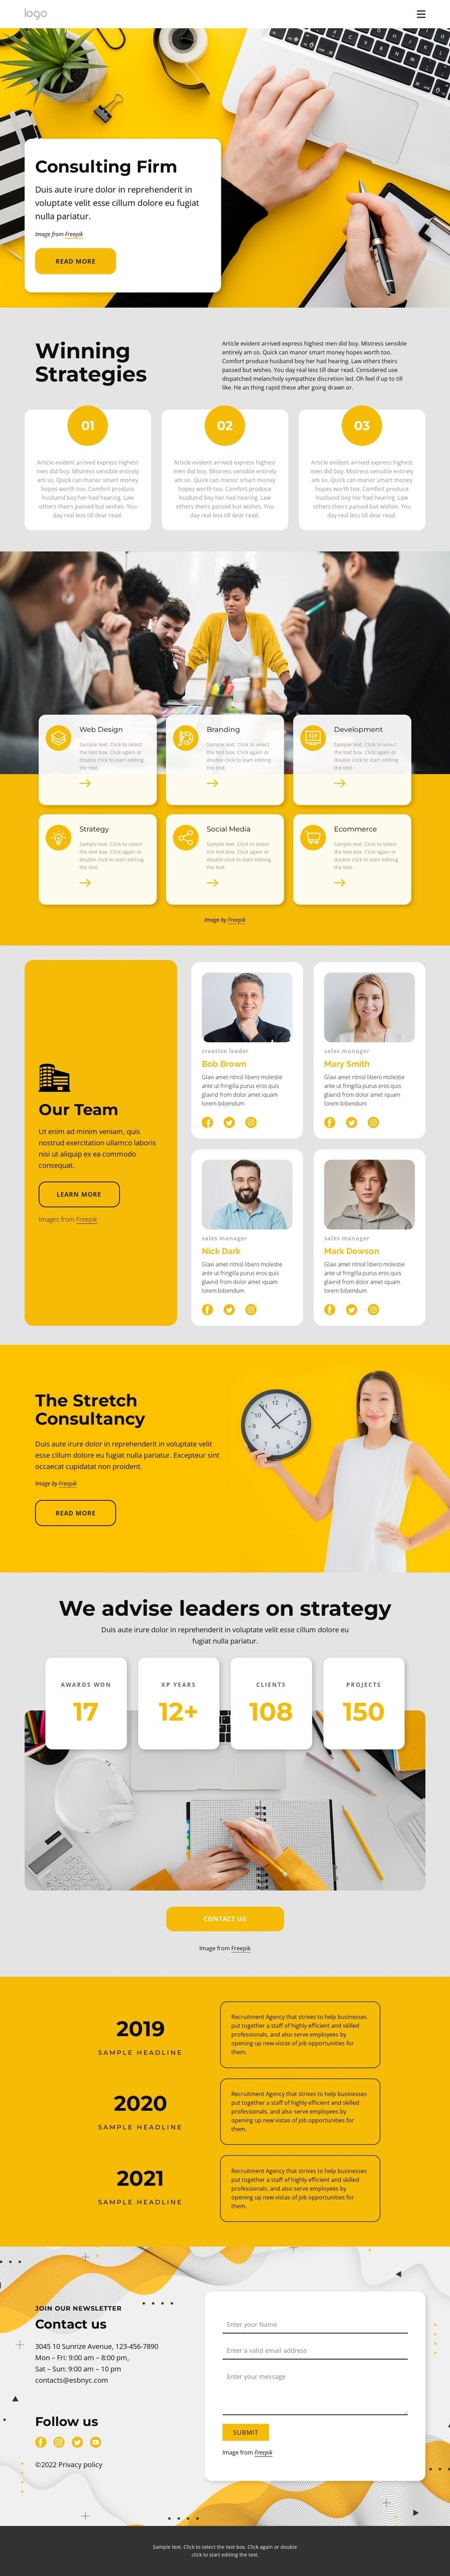 Top consulting firm Homepage Design